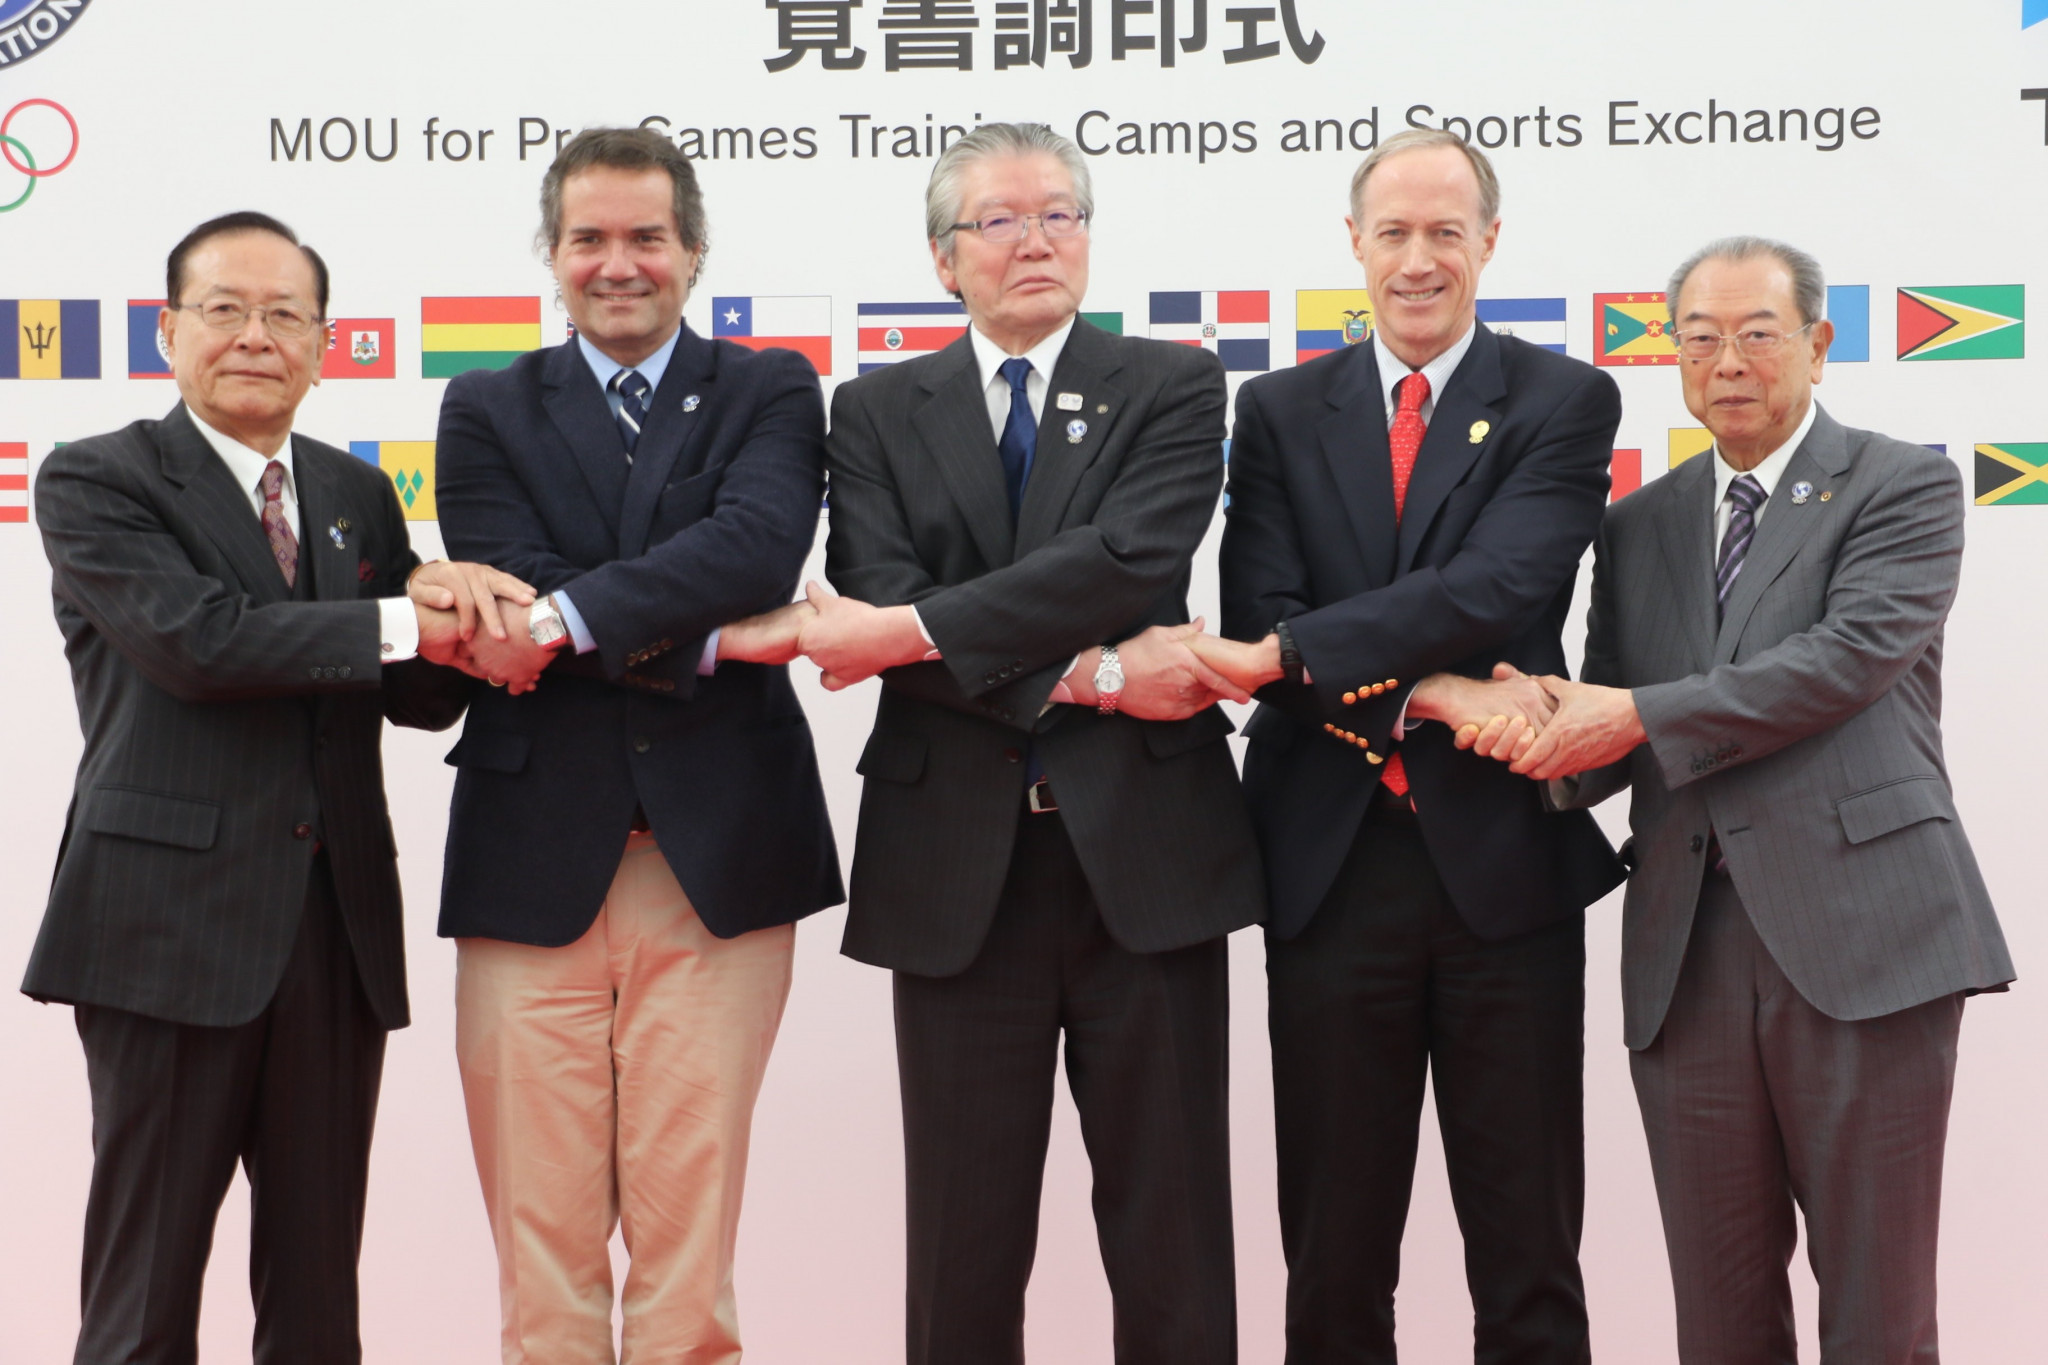 Panam Sports agreed to hold a pre-Games training camp in Tachikawa back in 2018 ©Panam Sports